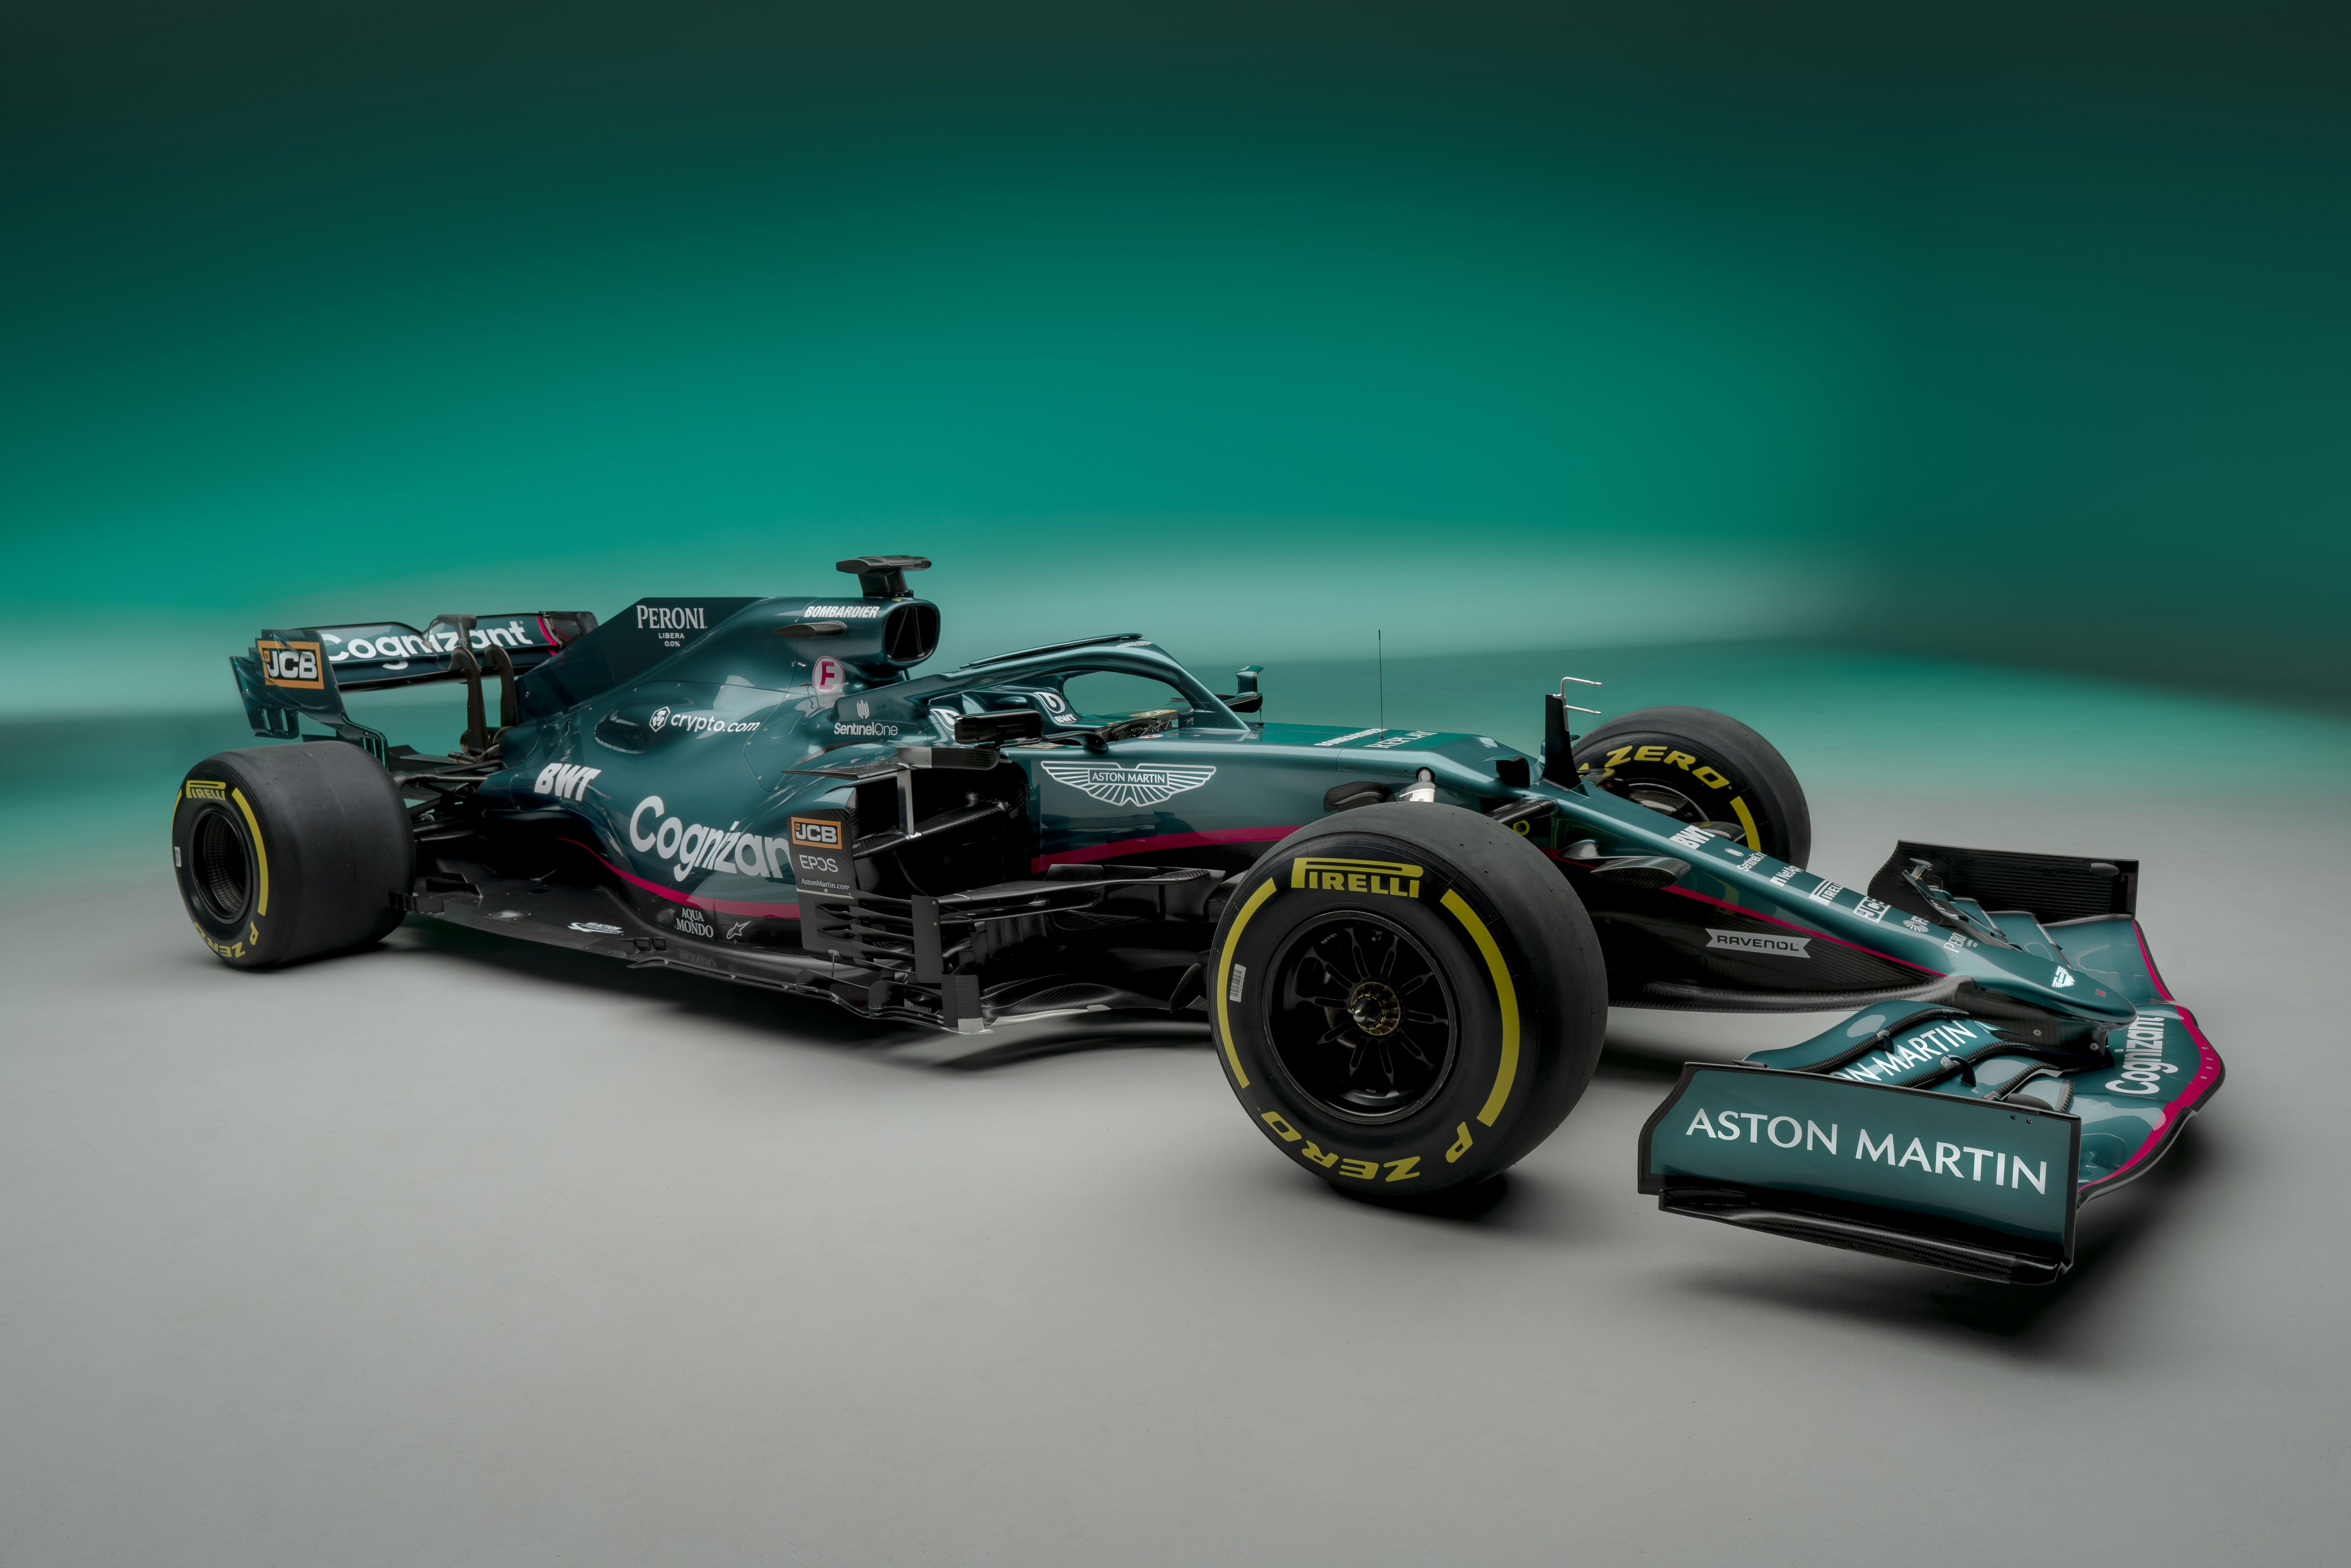 First Look at the Aston Martin AMR21 for the 2021 Formula 1 Season